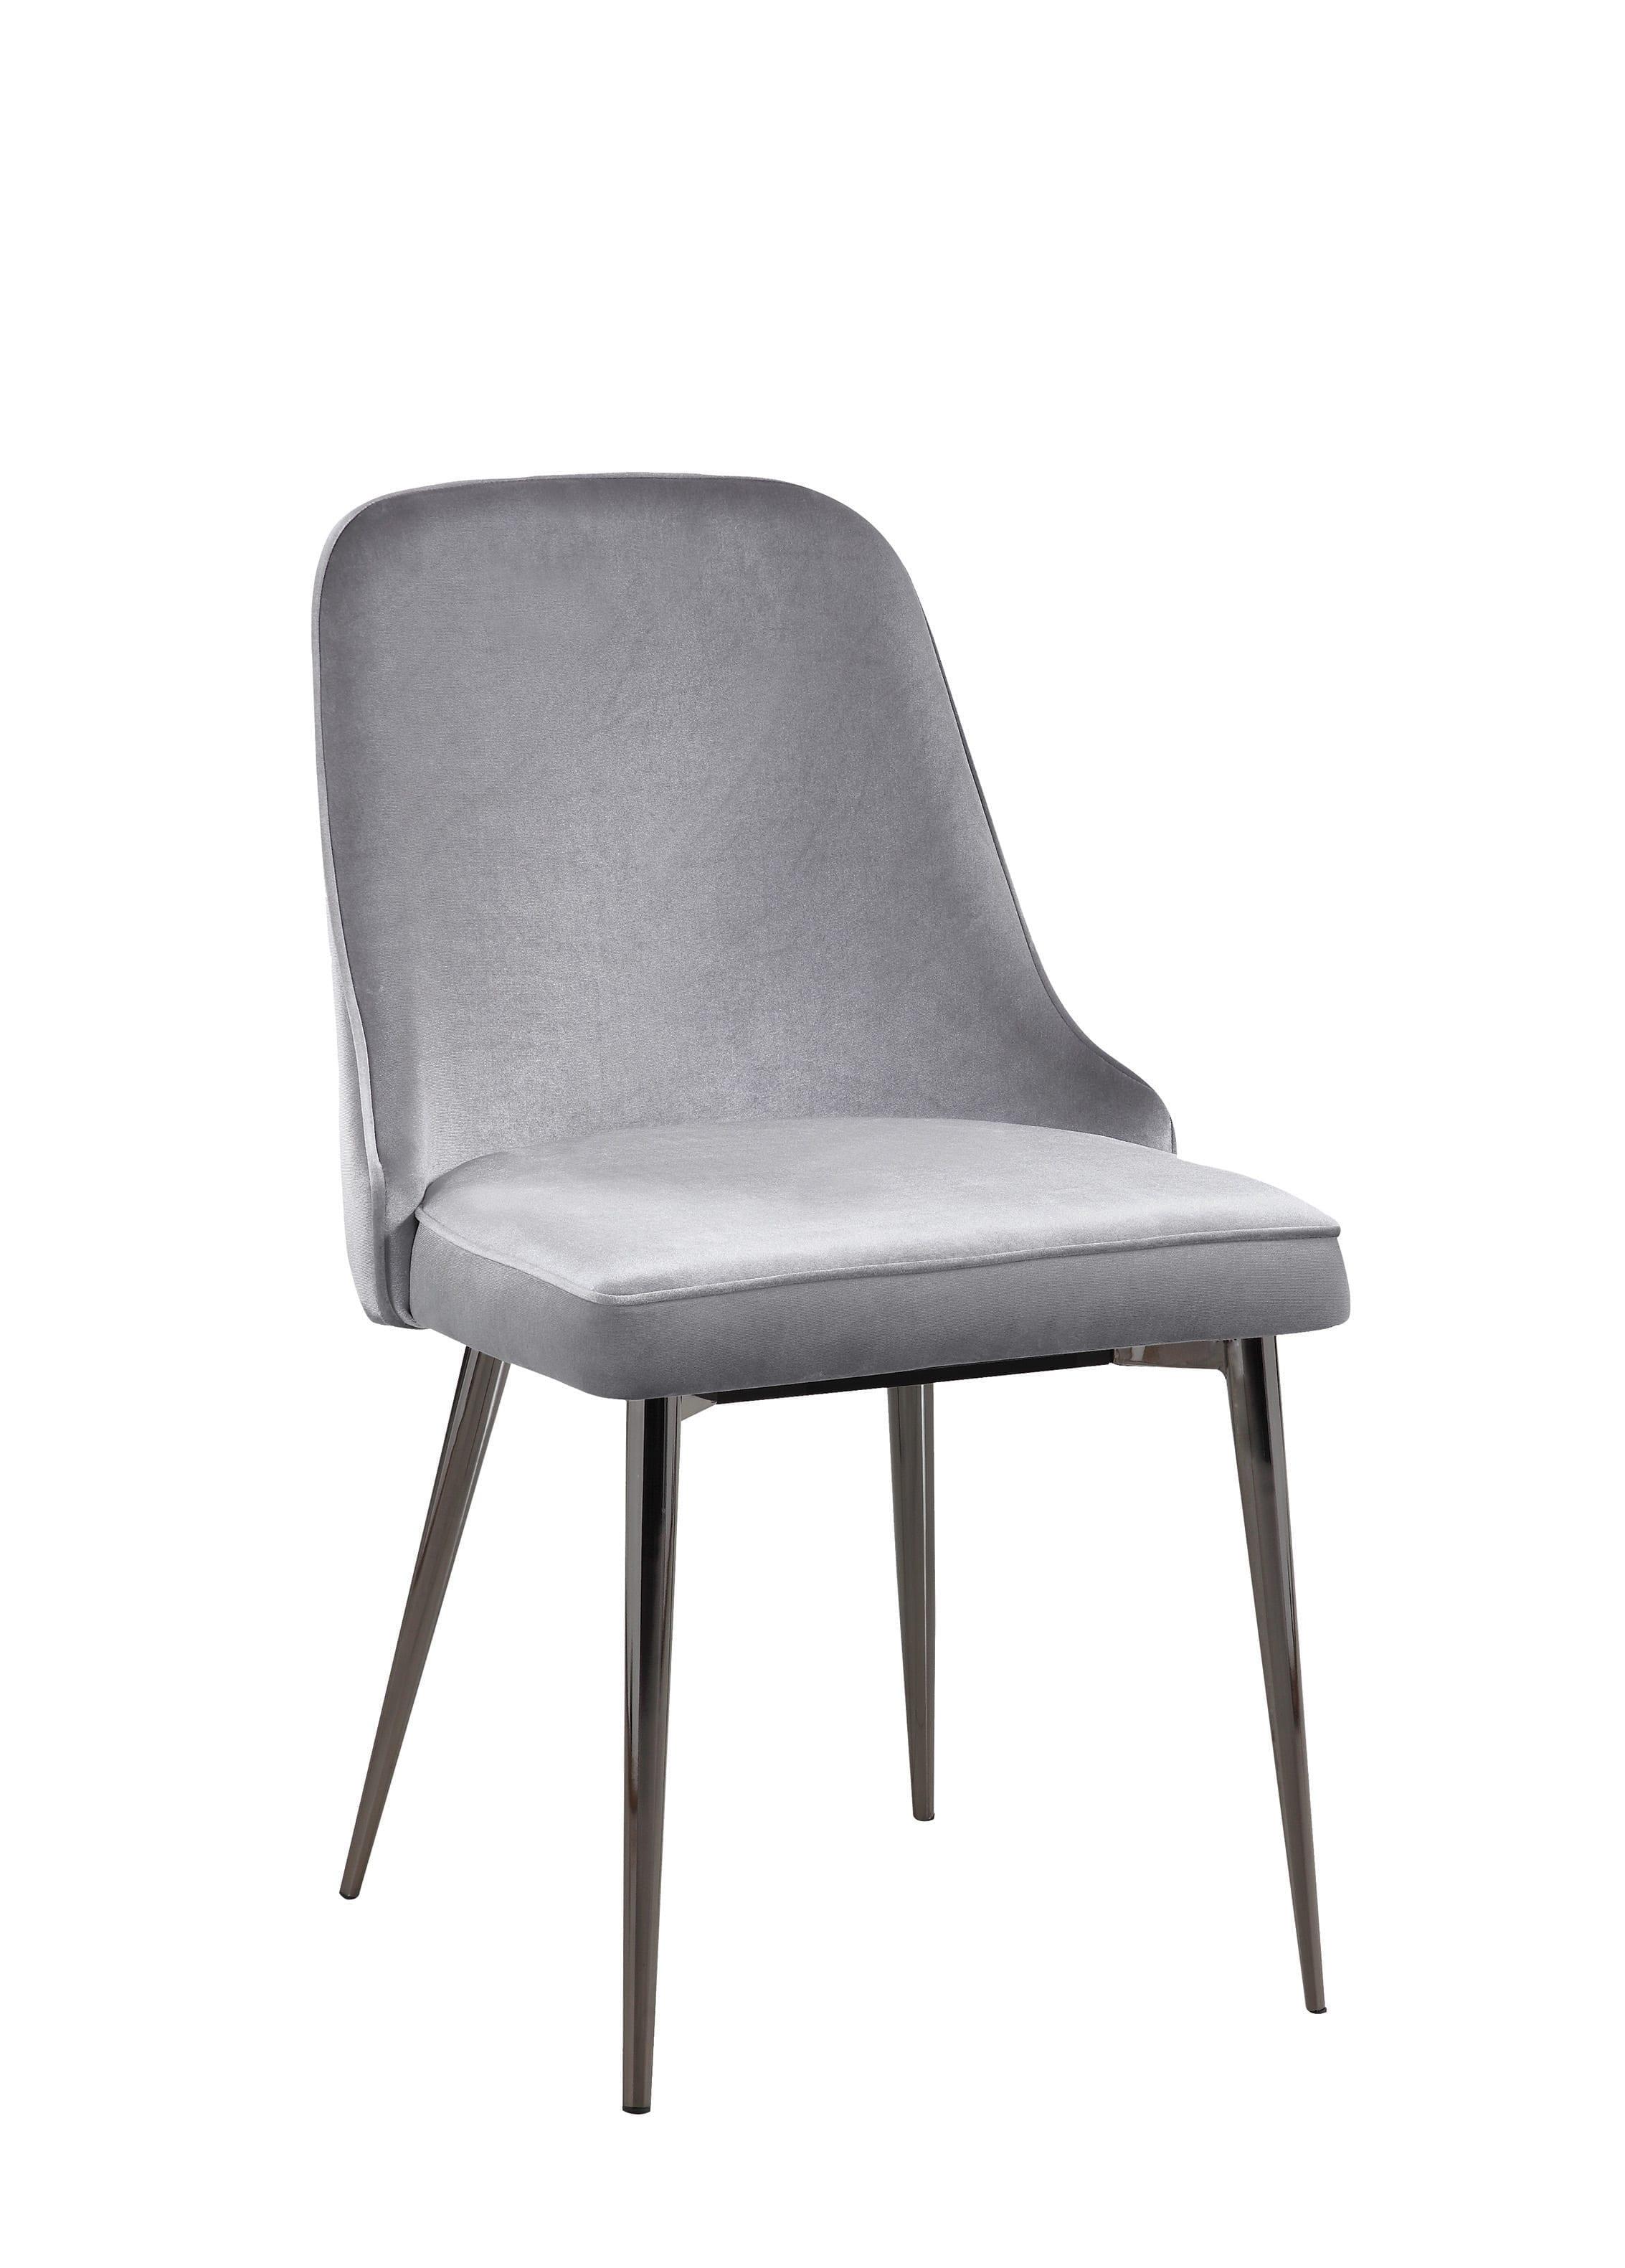 Modern Dining Chair Riverbank 107953 in Gray Fabric